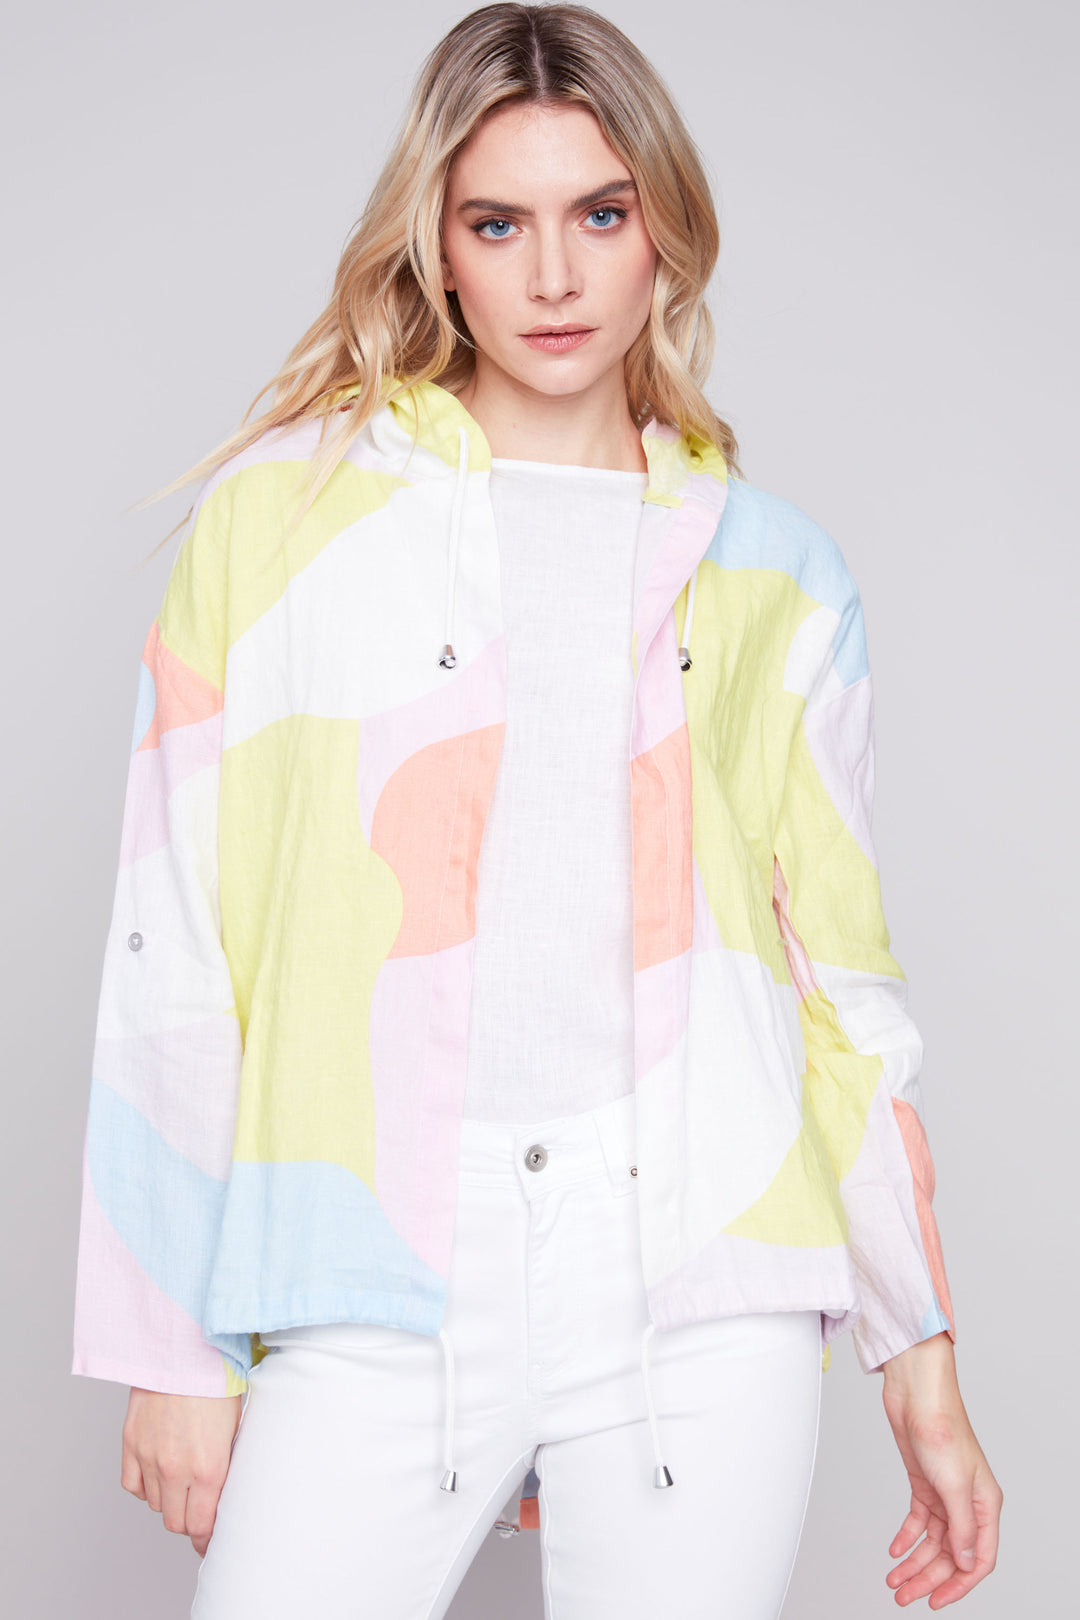 This gorgeous Print Hoodie Jacket is perfect for layering and with its charming print, hooded construction and drawstring detailing along the waist is made for spring days. 